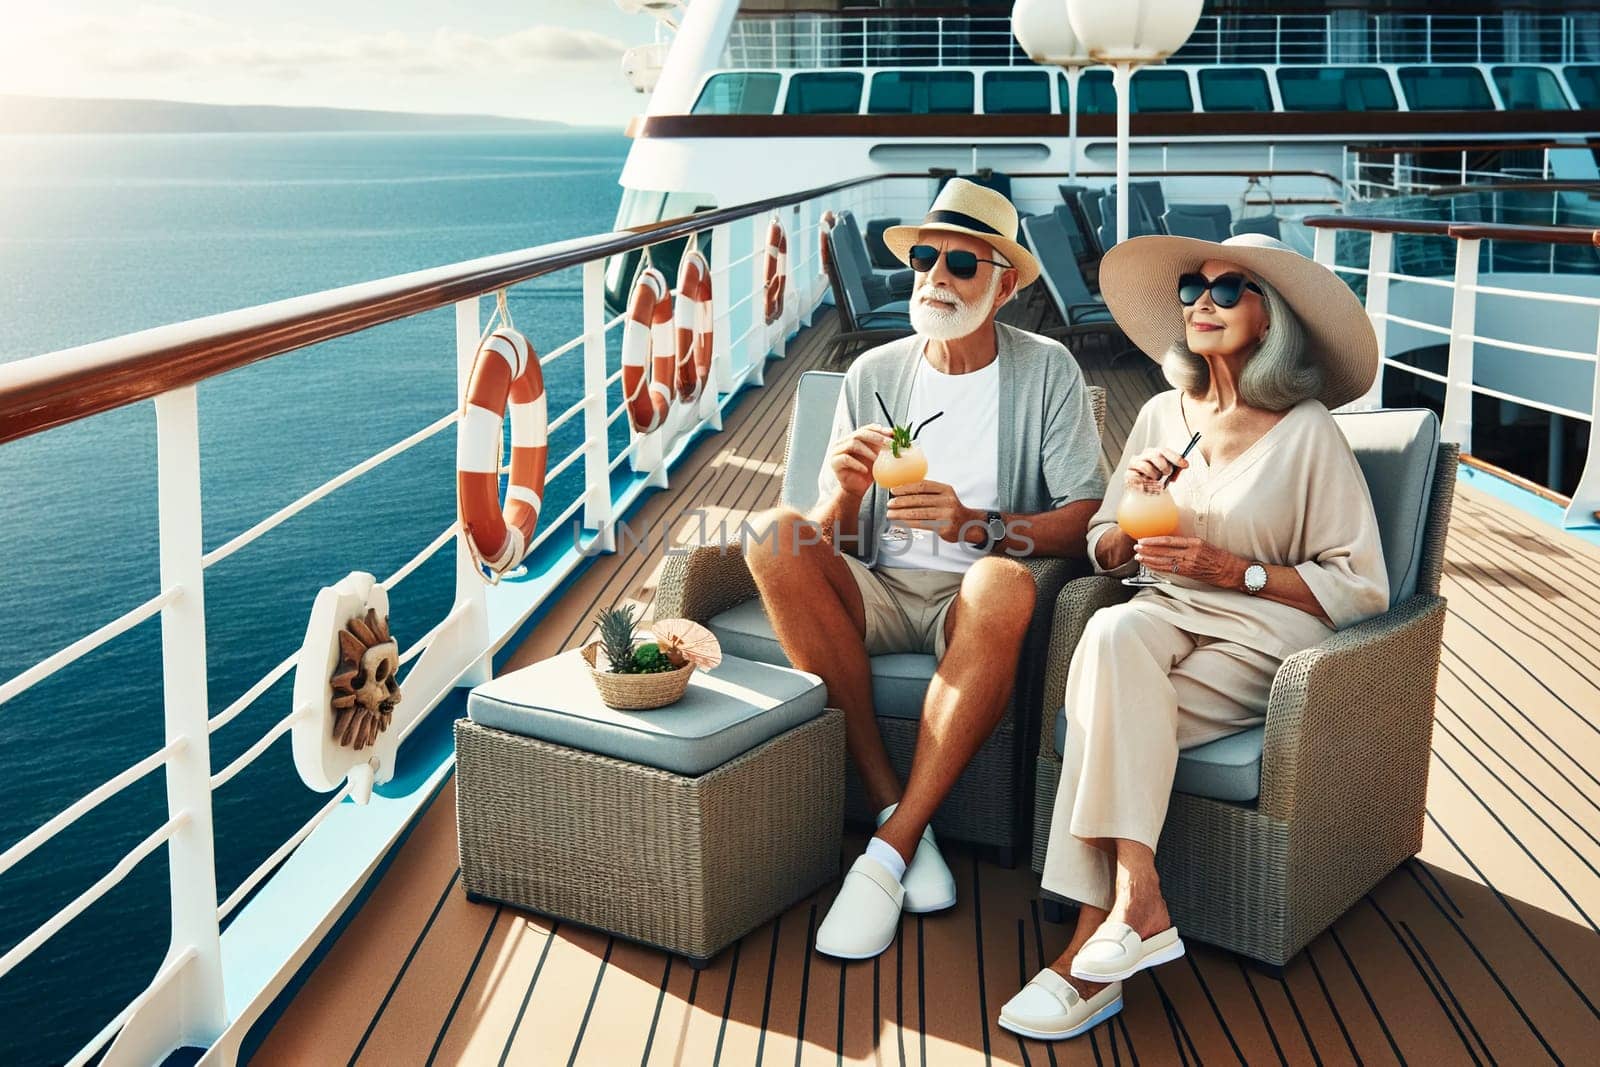 An older couple on the deck of a cruise ship in armchairs on a sunny day.